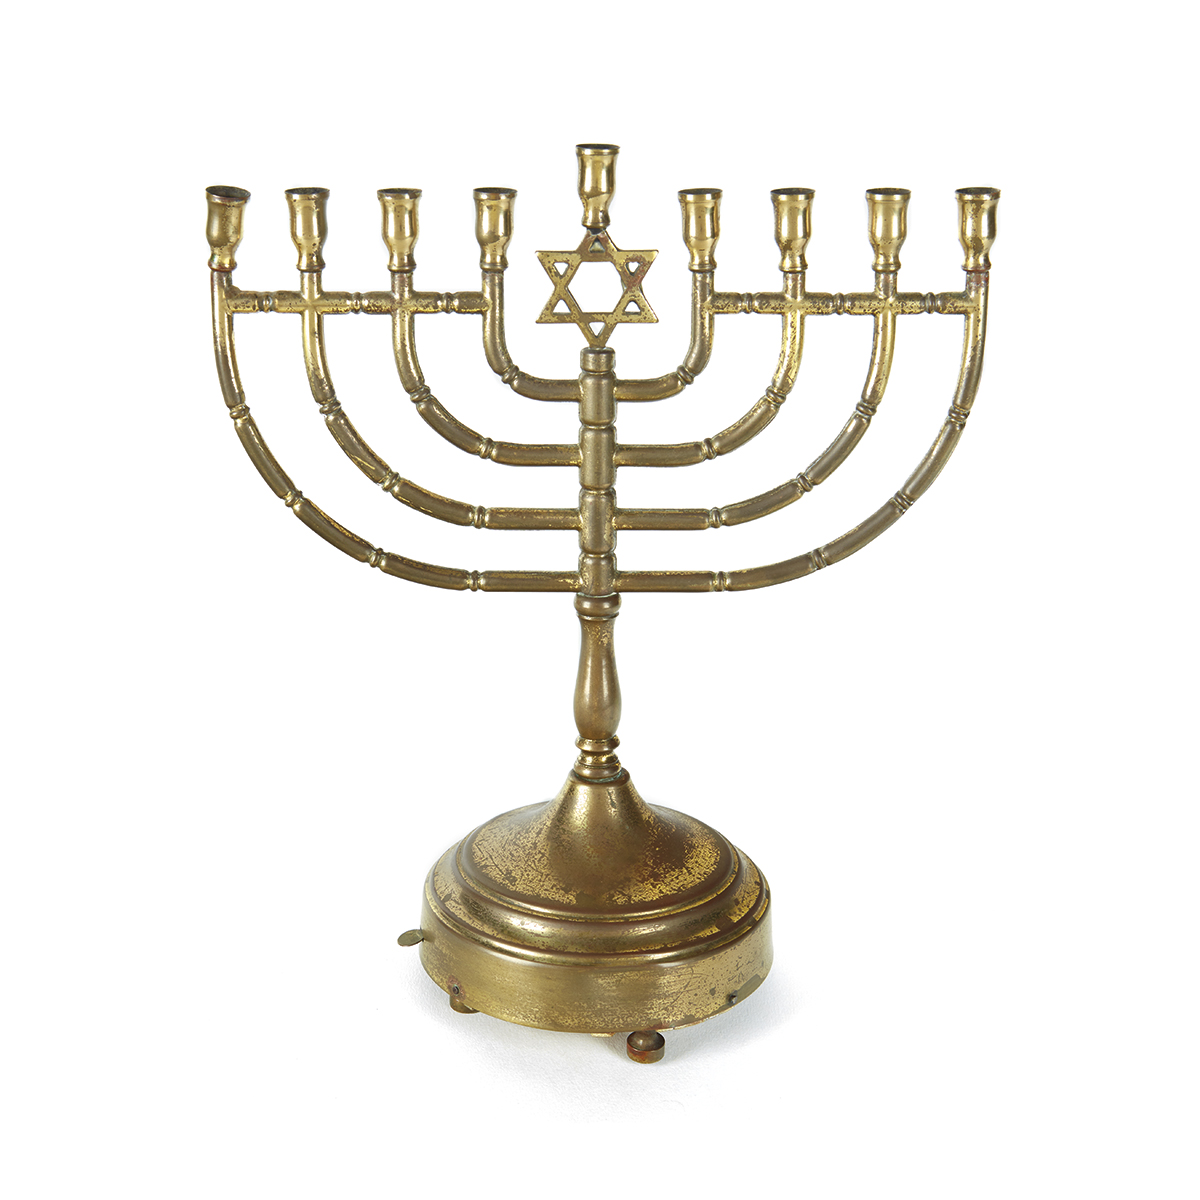 Menorah of Marilyn Monroe Sold for $112,522 at Auction